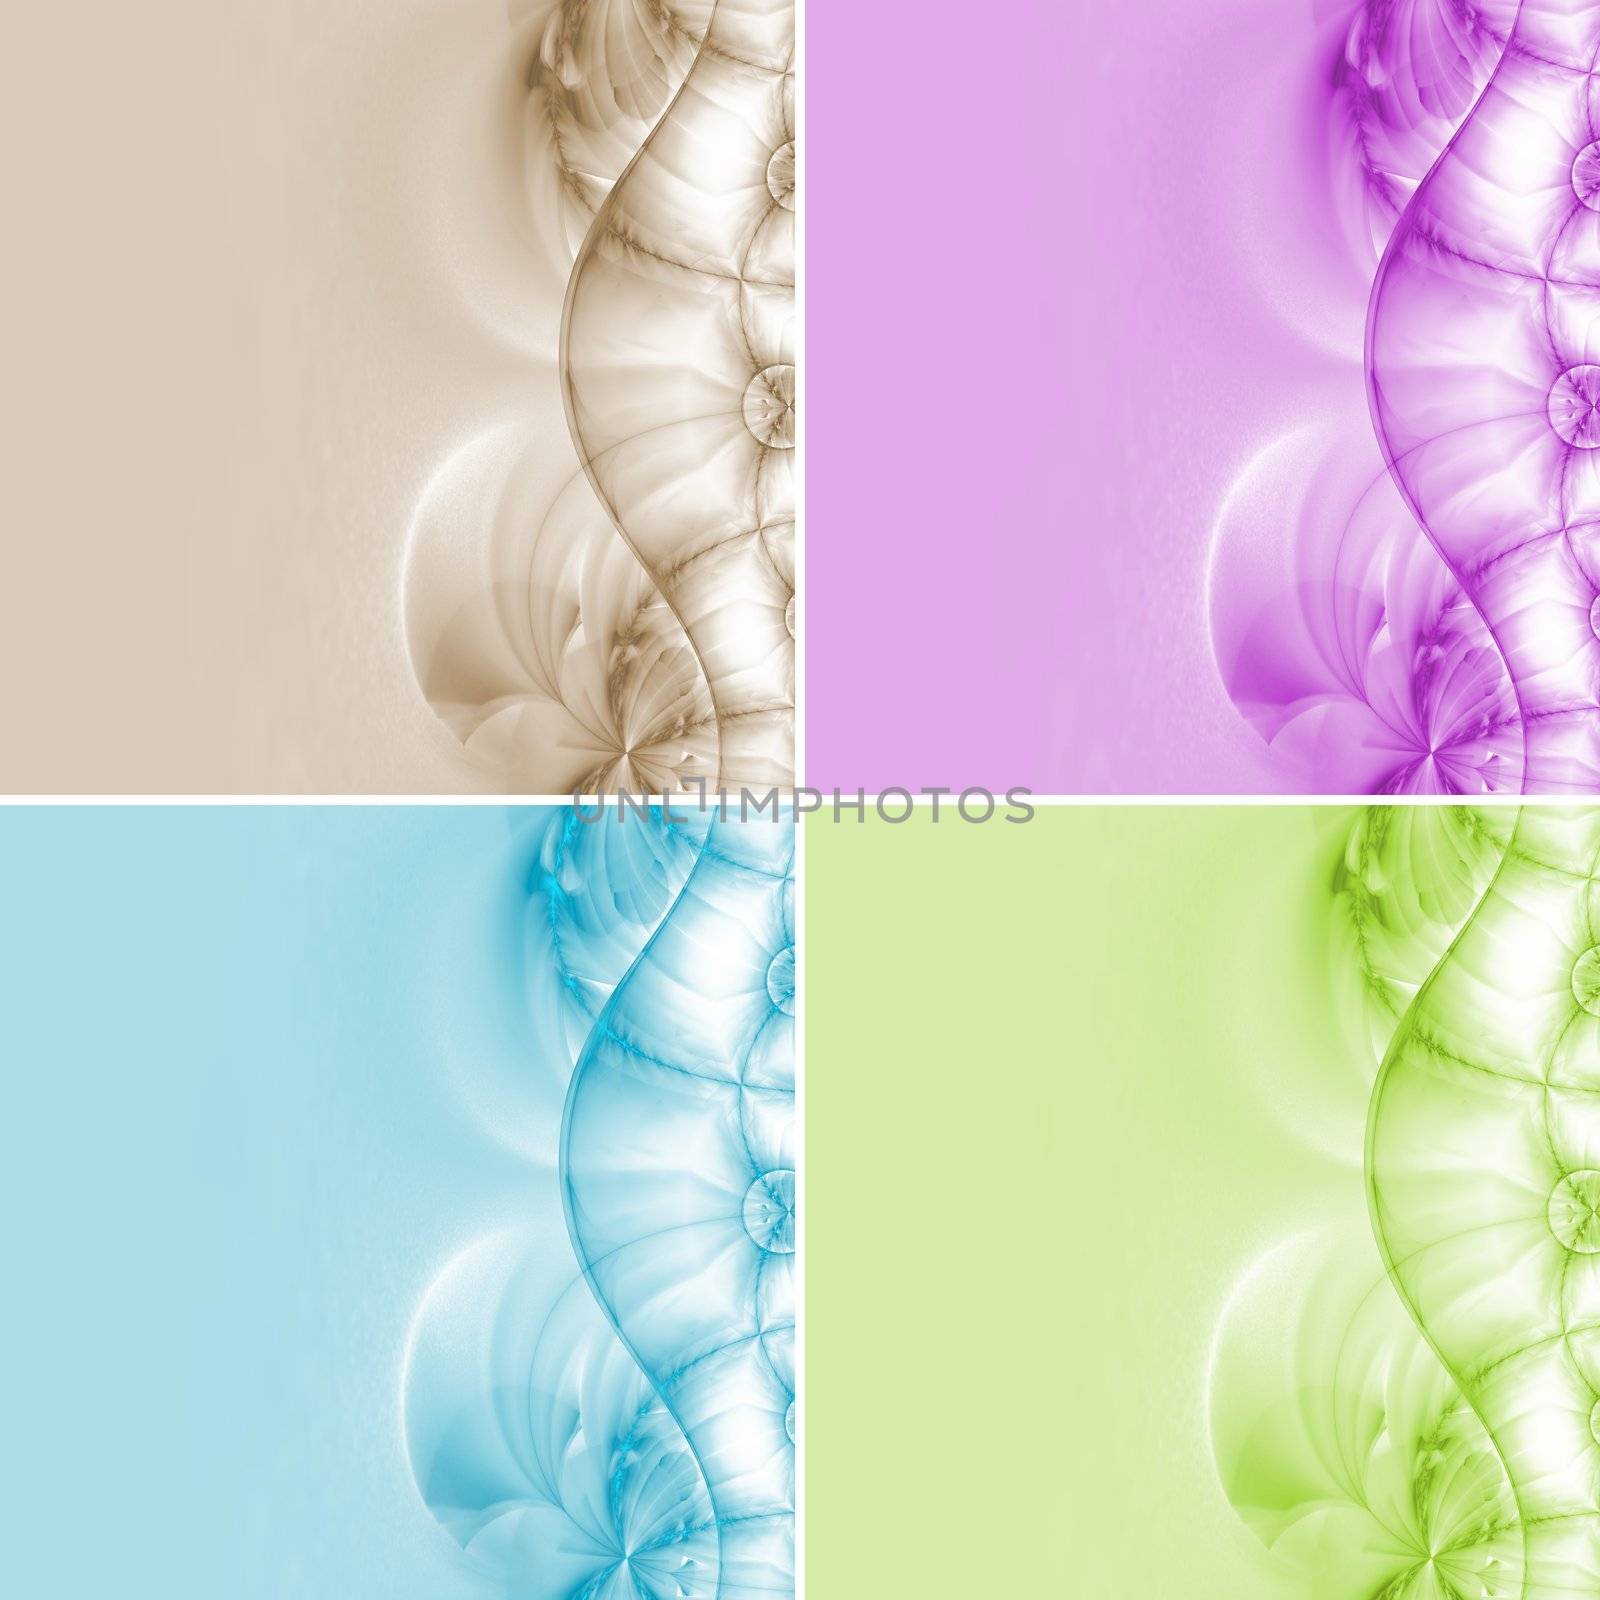 Collage of abstract background in four different colors.